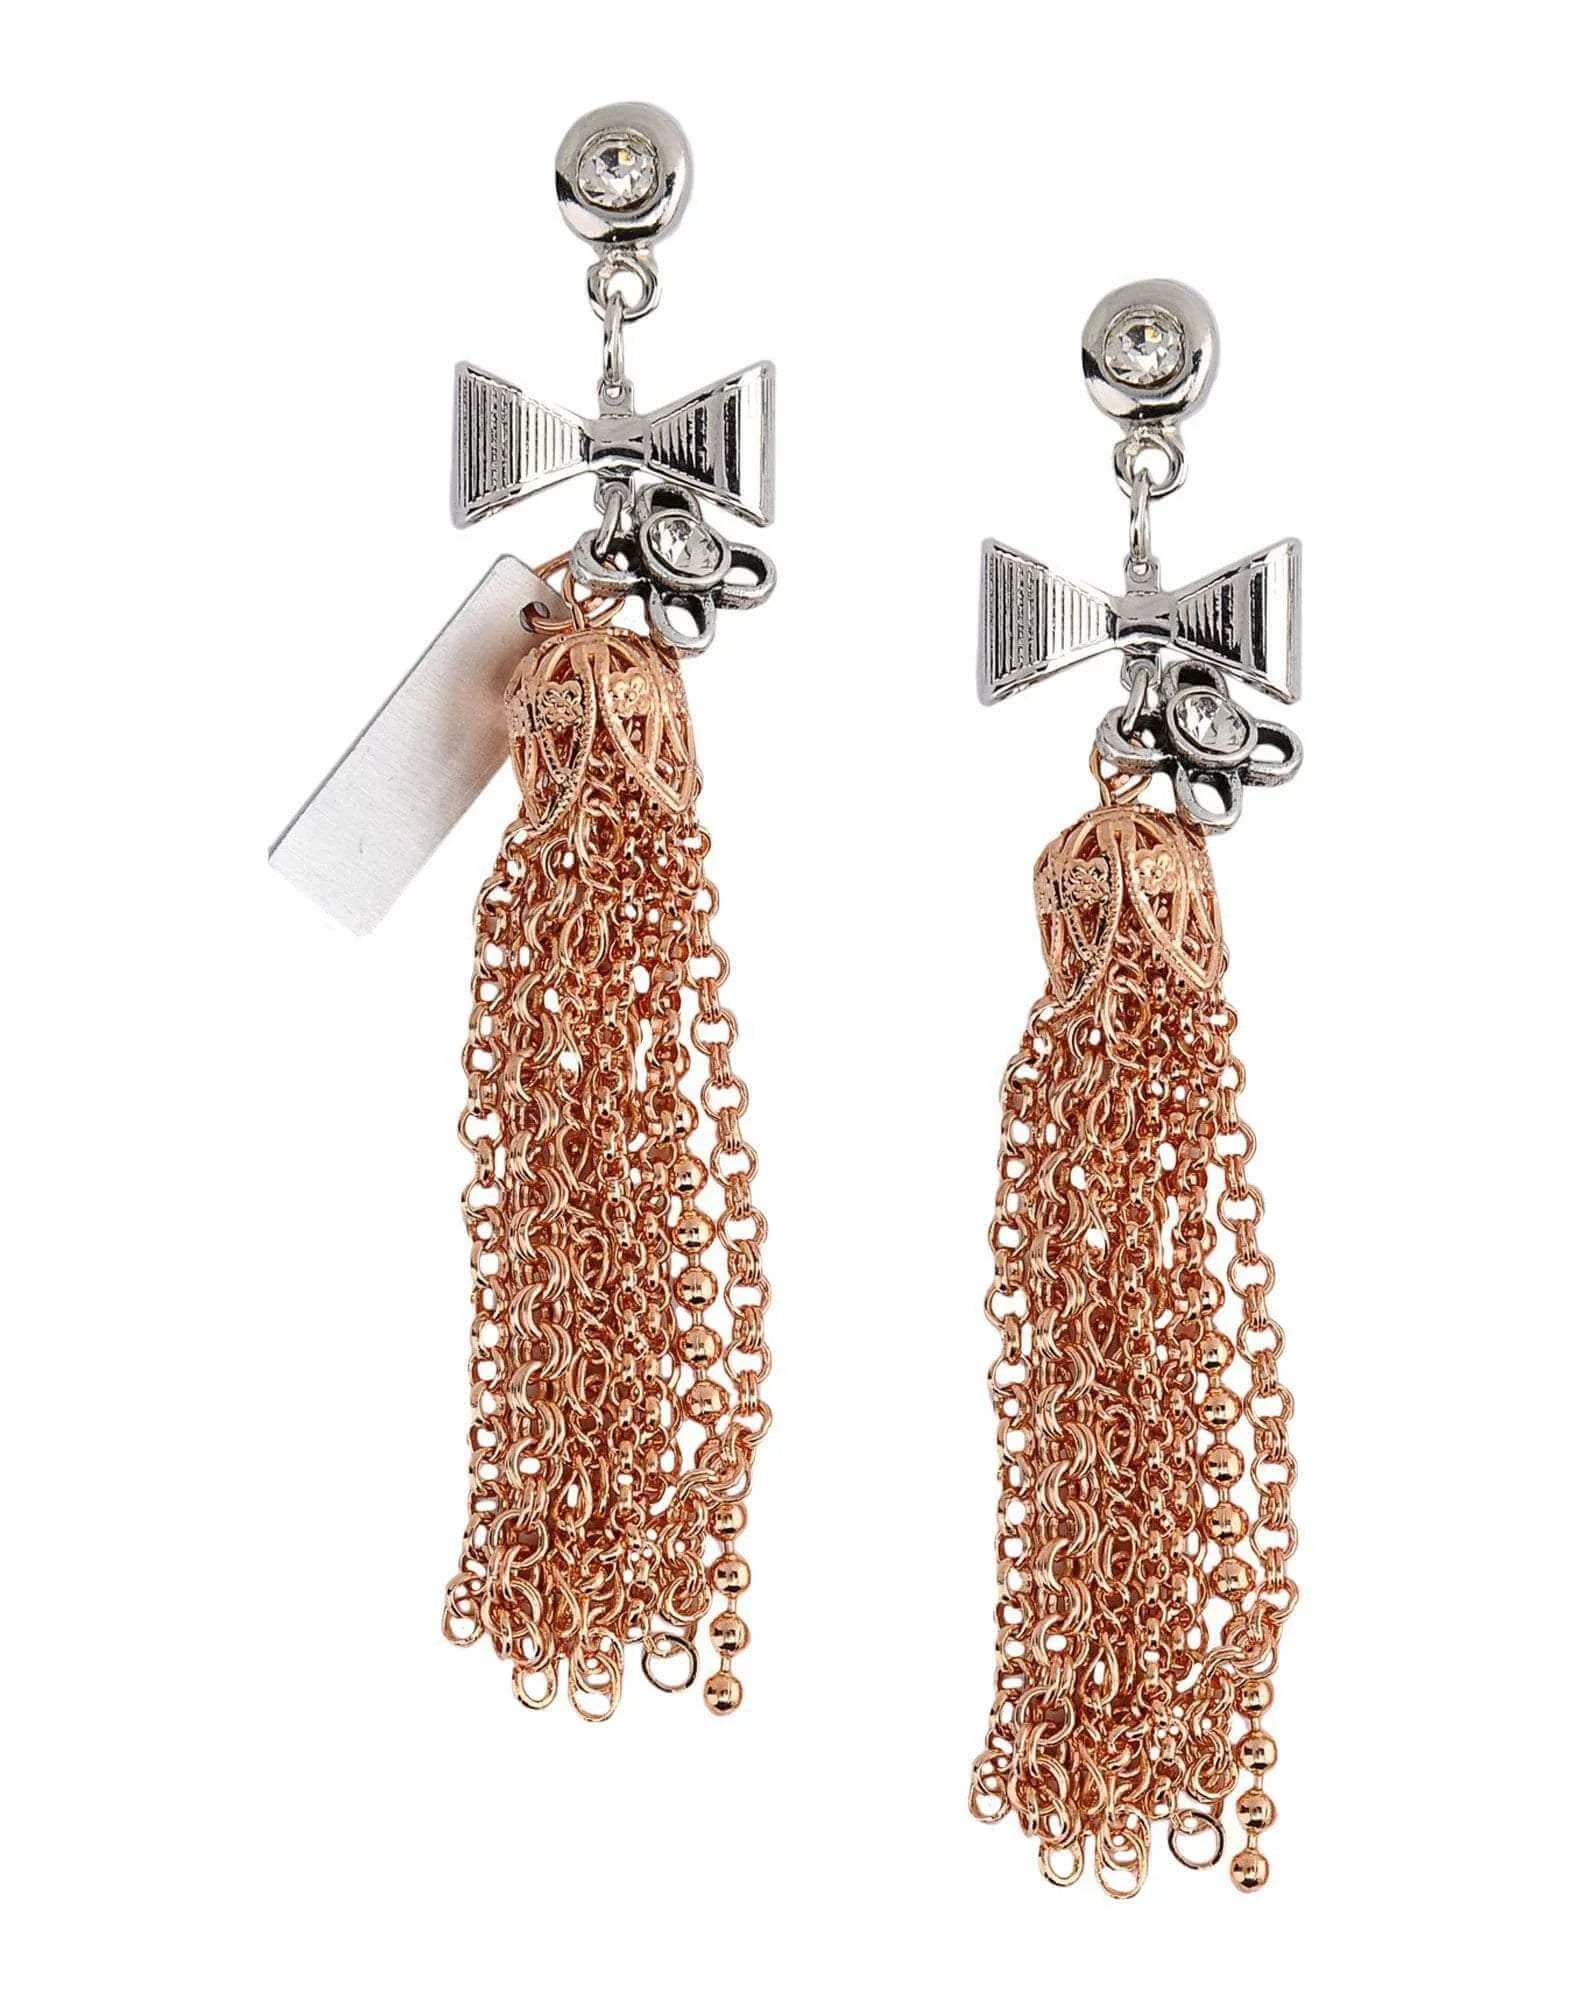 Tassel Earrings in Silver, Rose Gold and Crystals - Maiden-Art